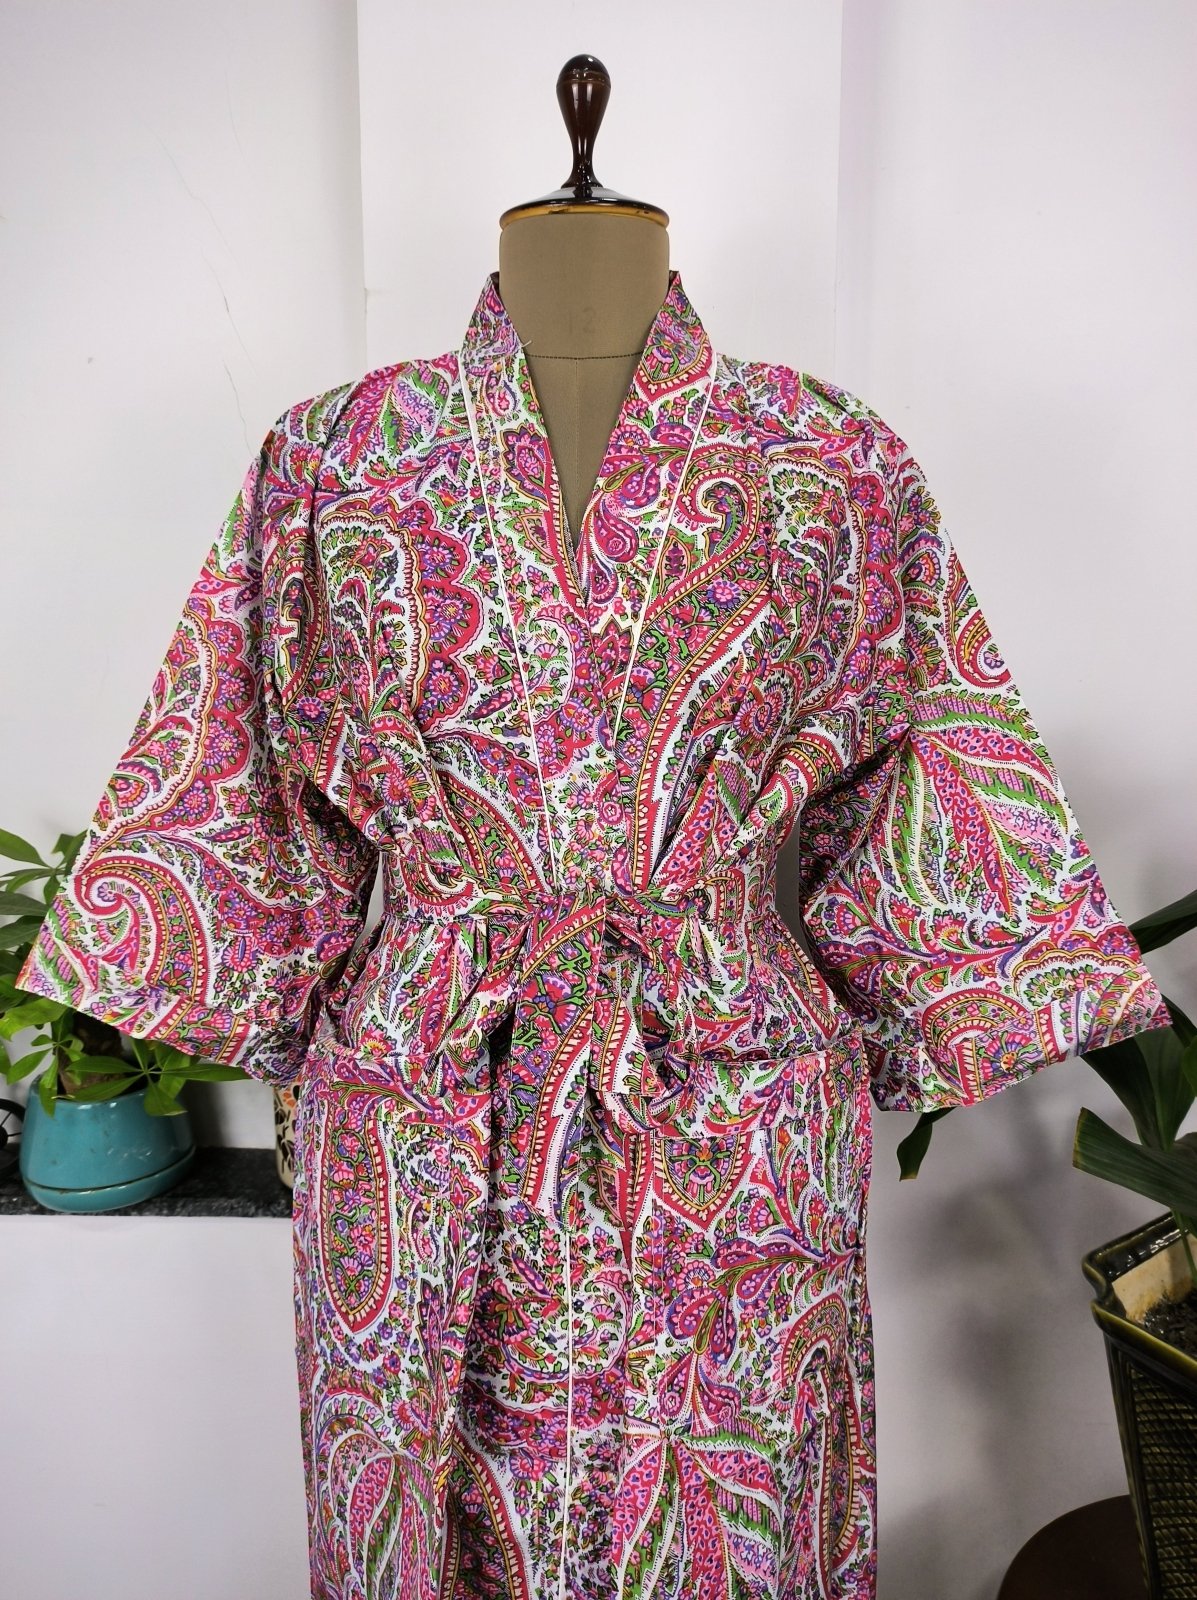 Pure Cotton Kimono Indian Handprinted Boho House Robe Summer Dress | White Pink Paisley Persian Luxury Cover Up, Maternity Mom Bridal - The Eastern Loom